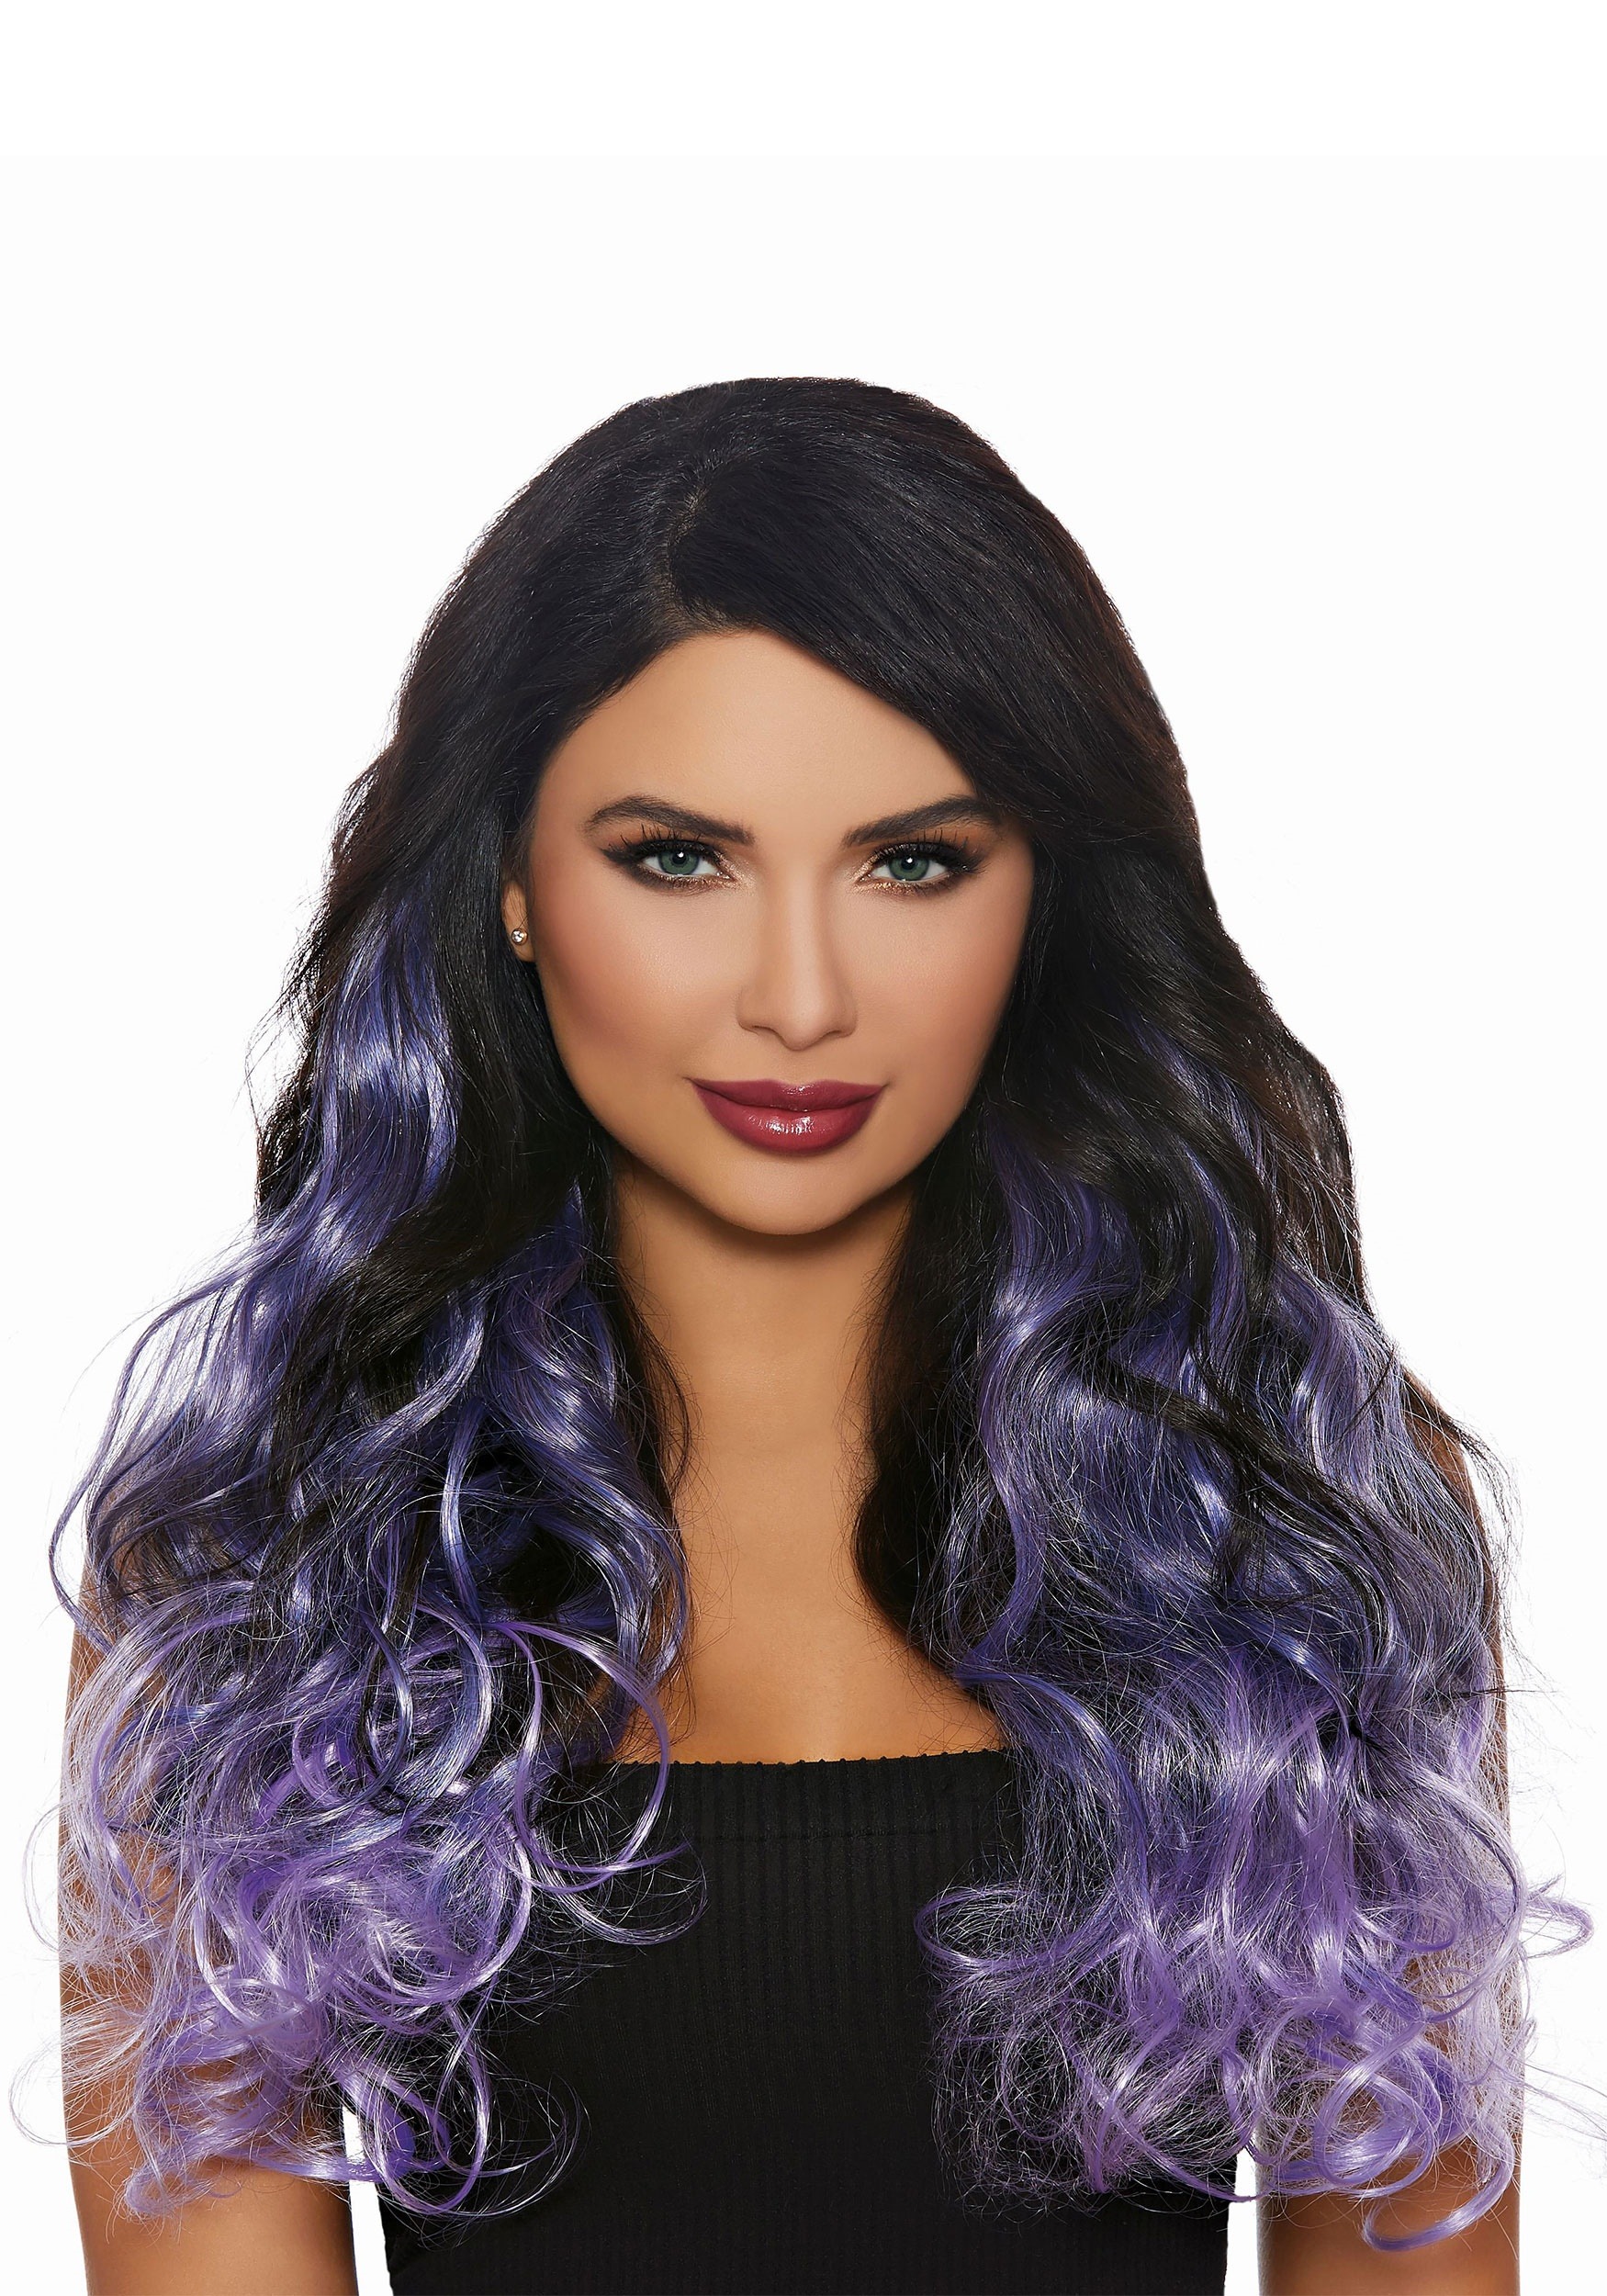 Long Curly Lavender Ombre Women's Hair. curly hair extensions ombre. 